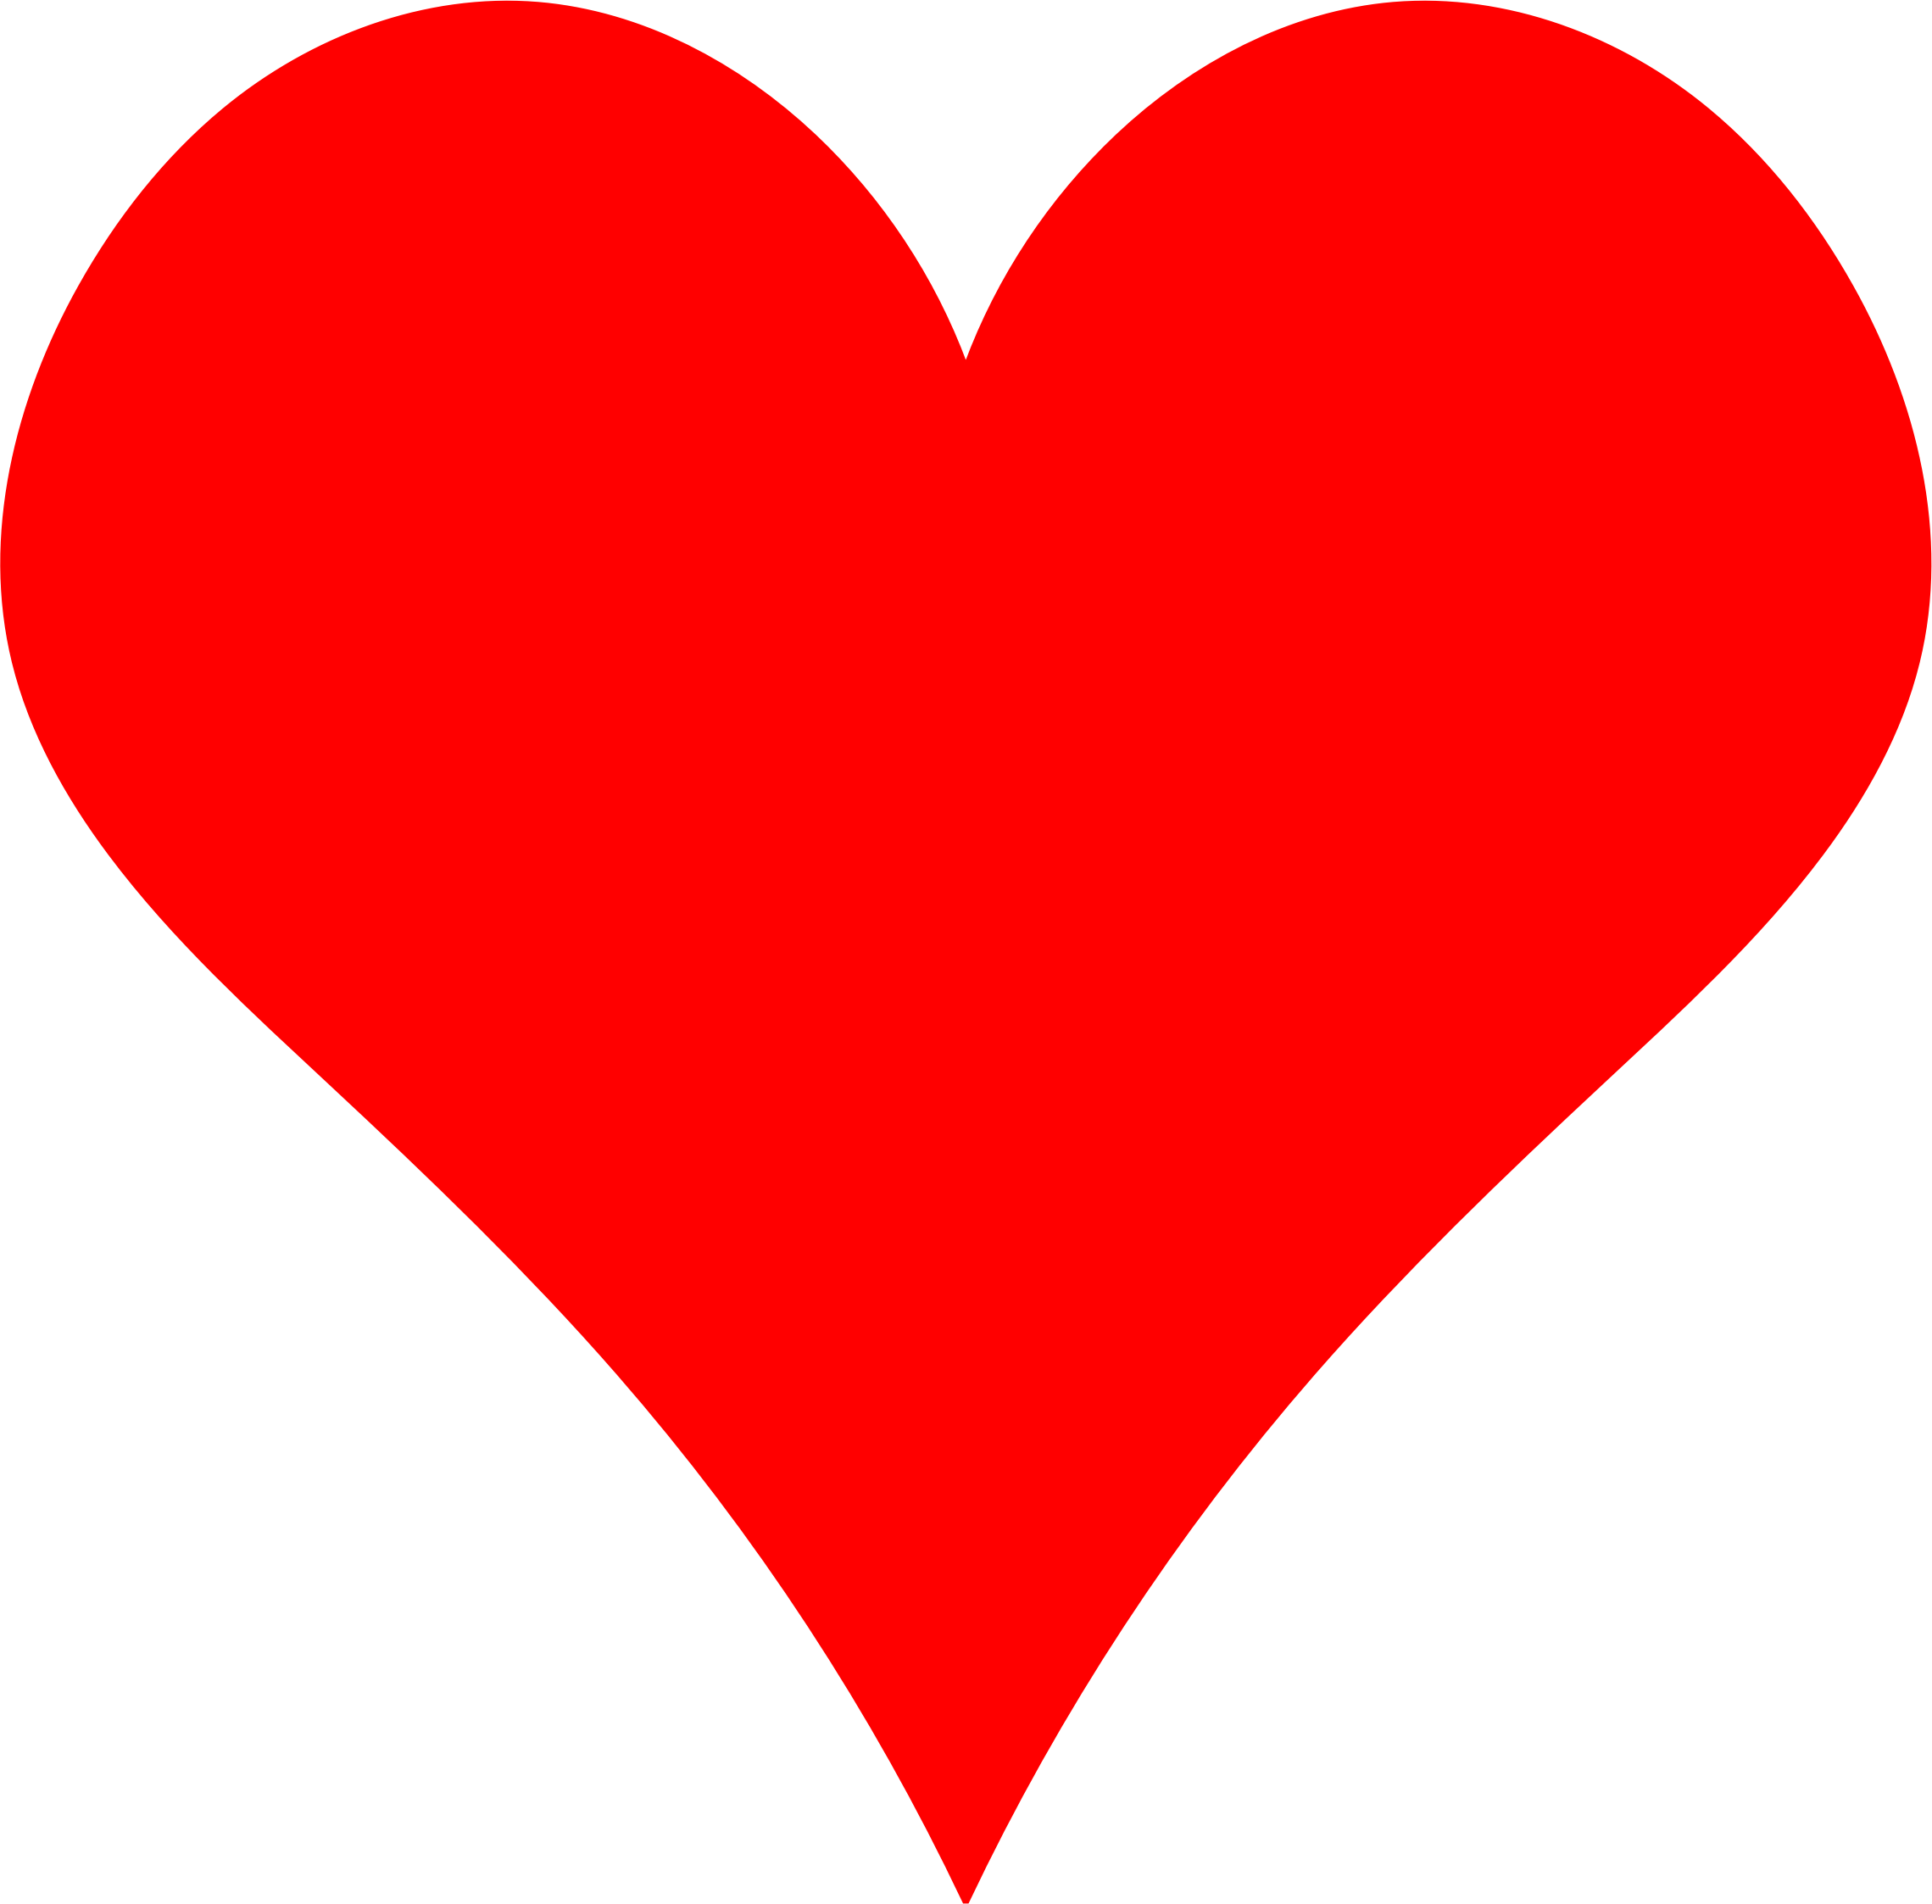 big red heart clipart - photo #7